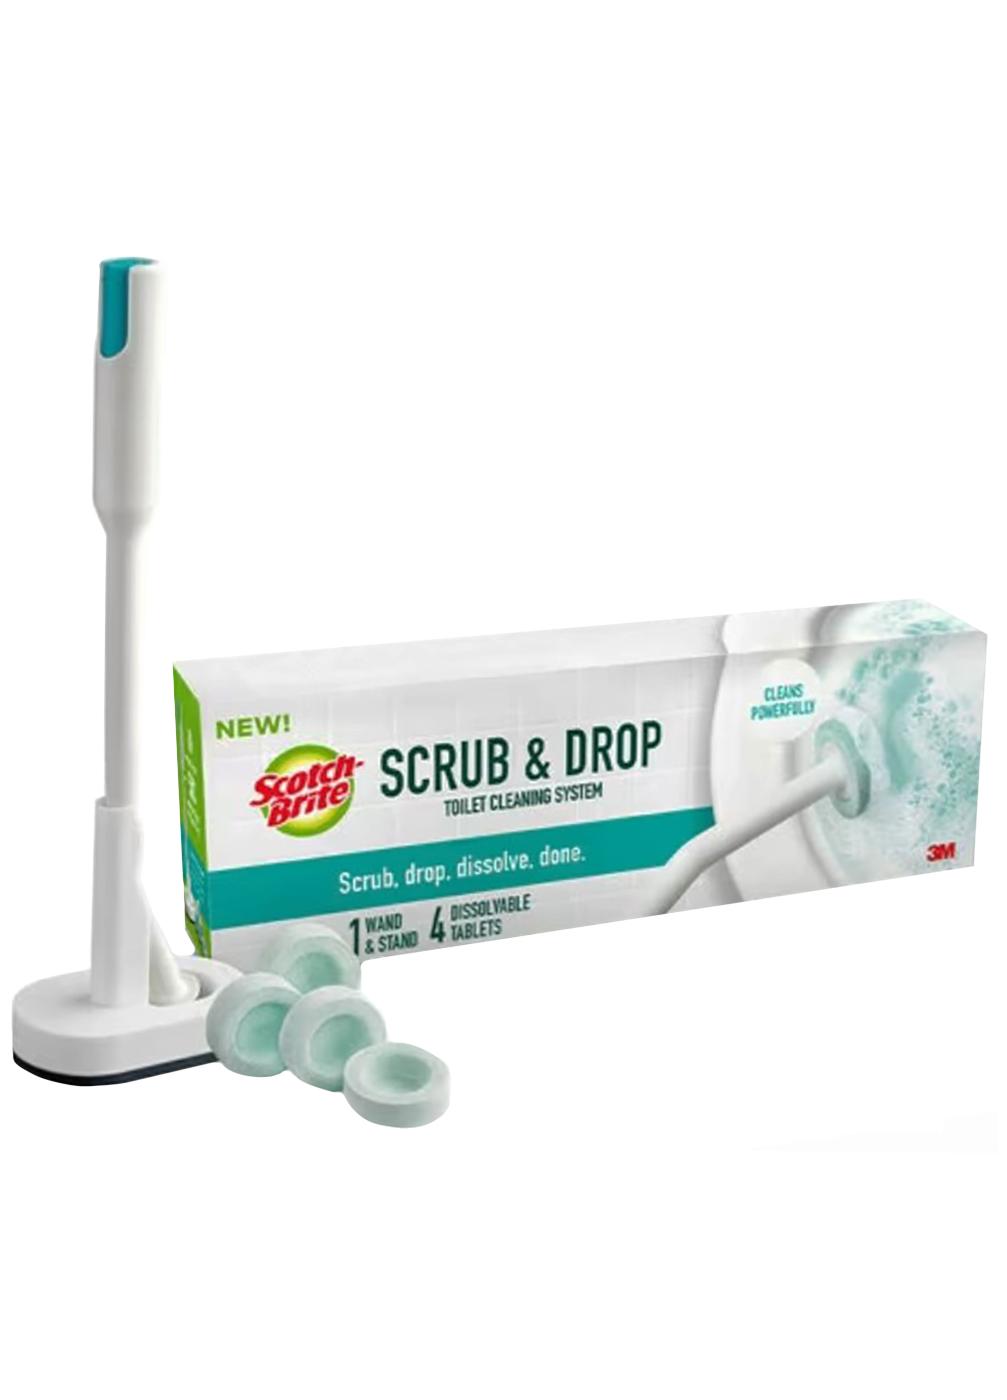 Scotch-Brite Scrub & Drop Toilet Cleaning System; image 2 of 2